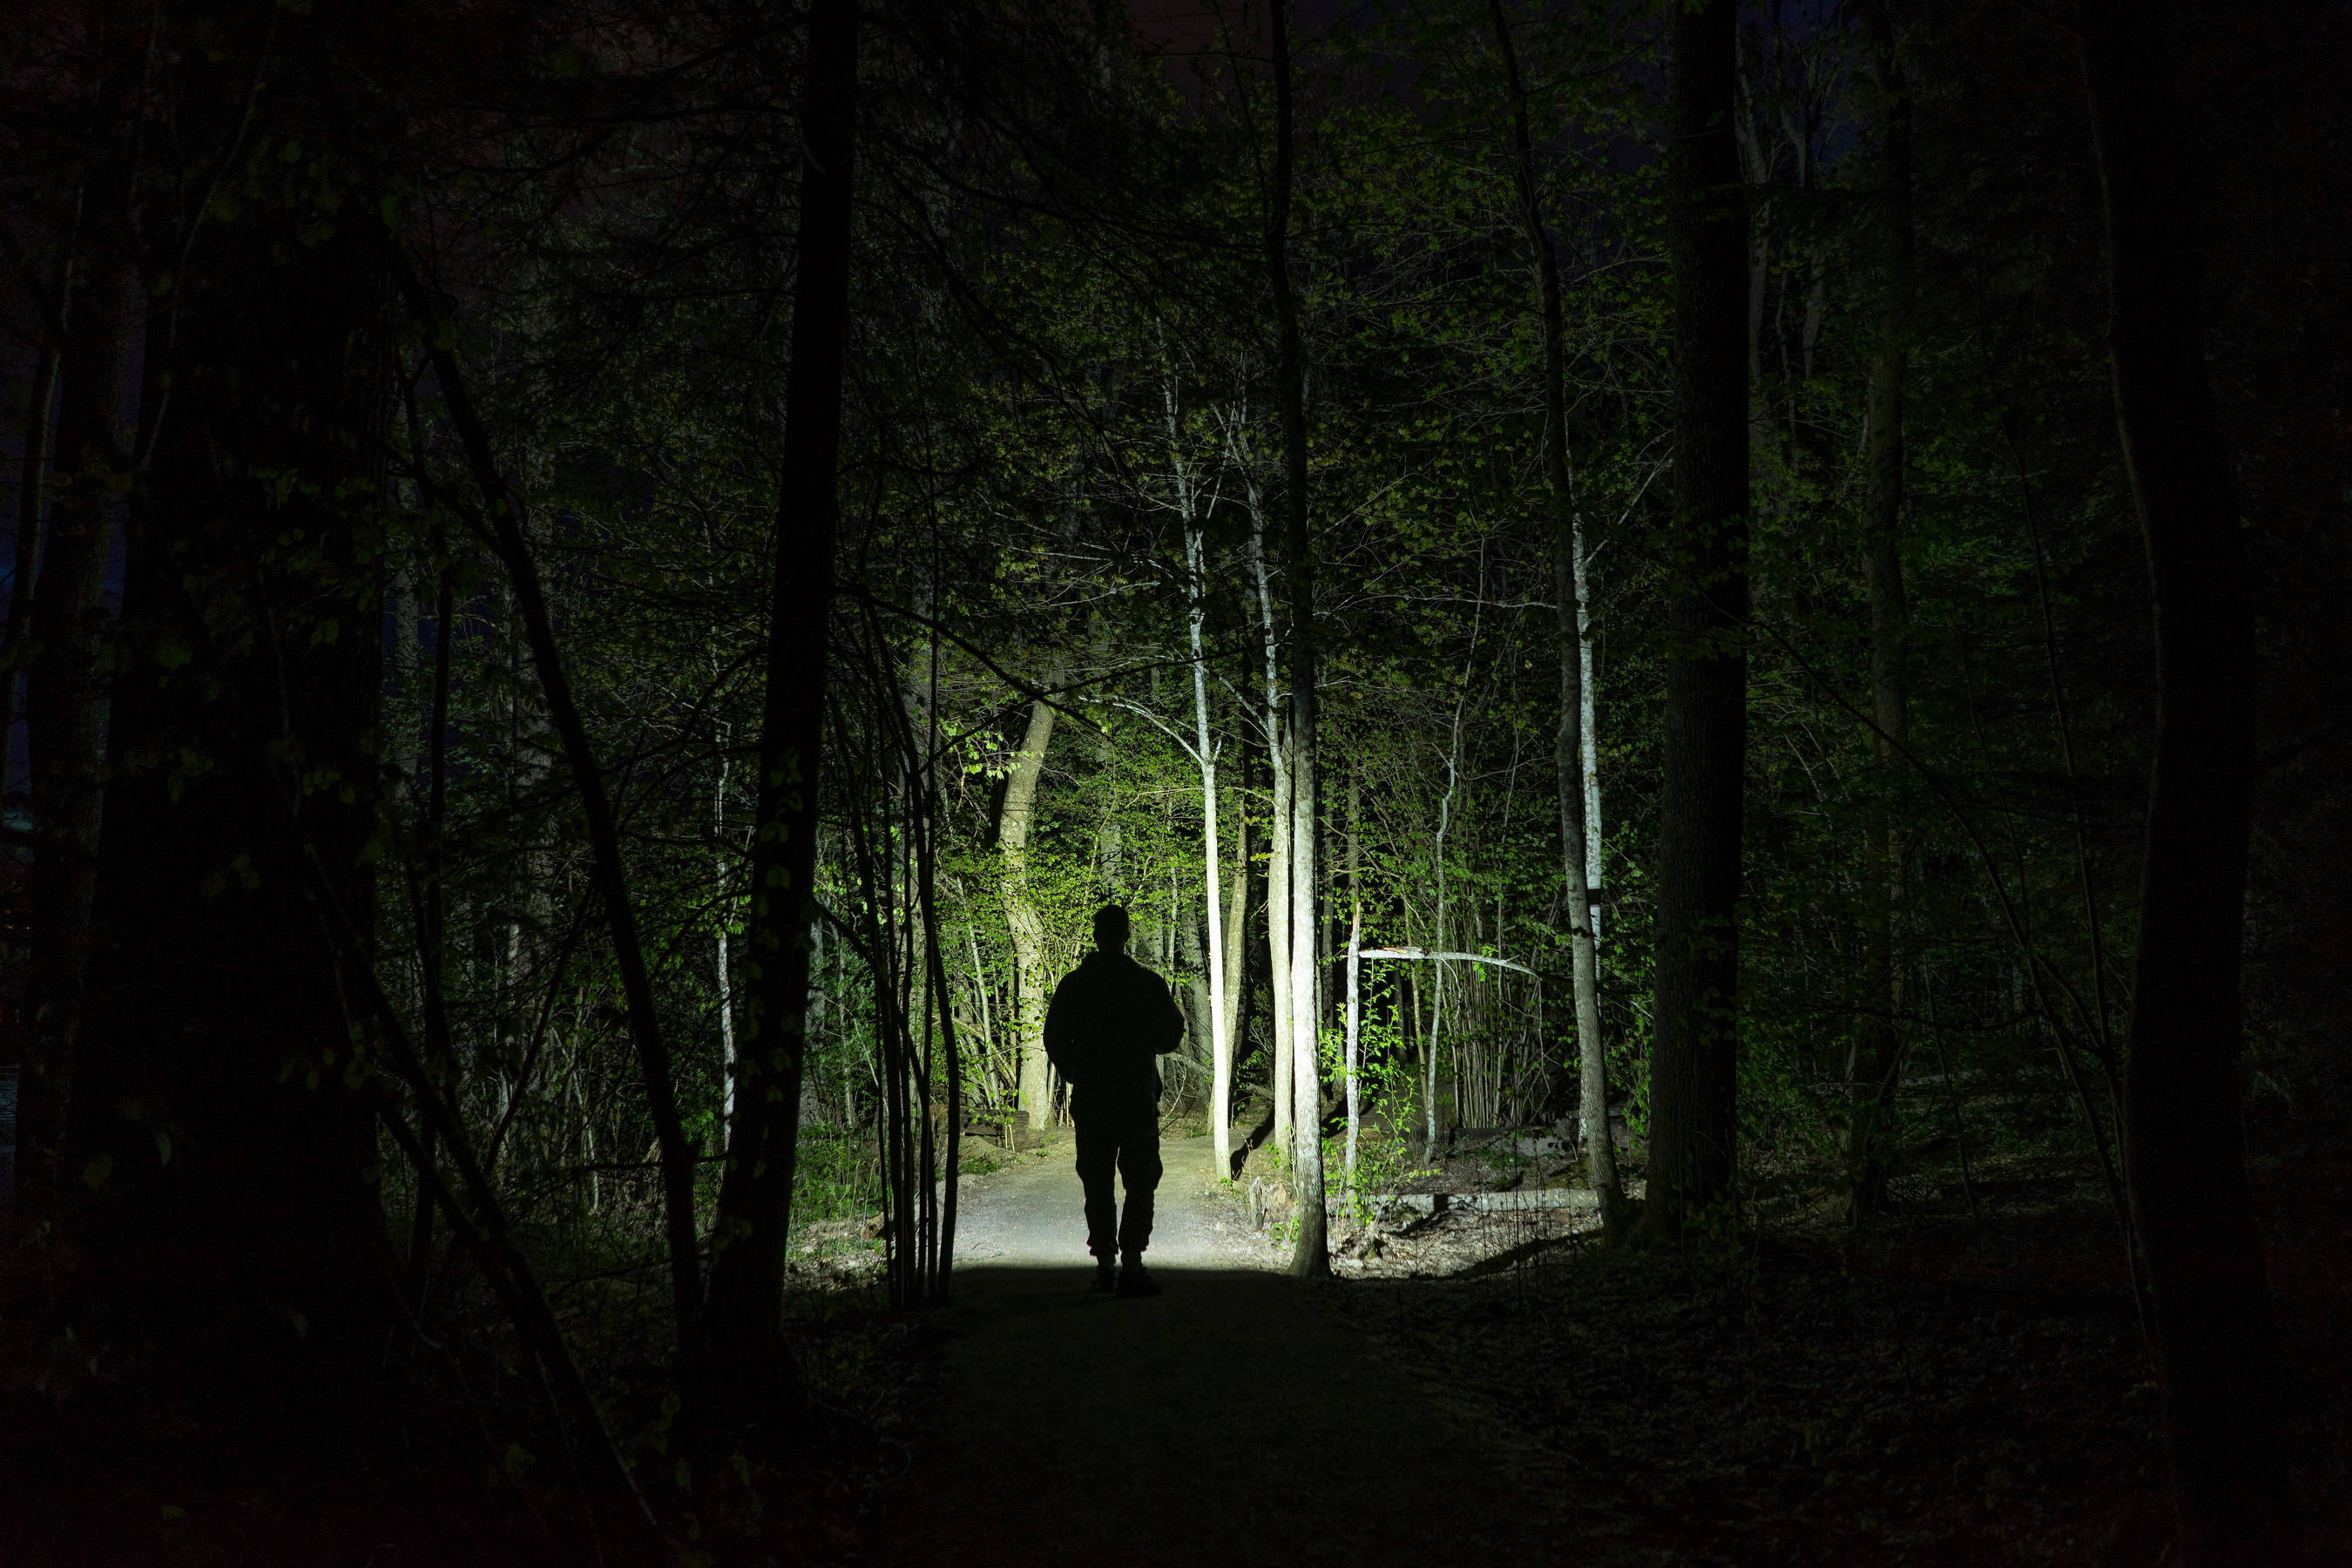 Man walking in a forest at night